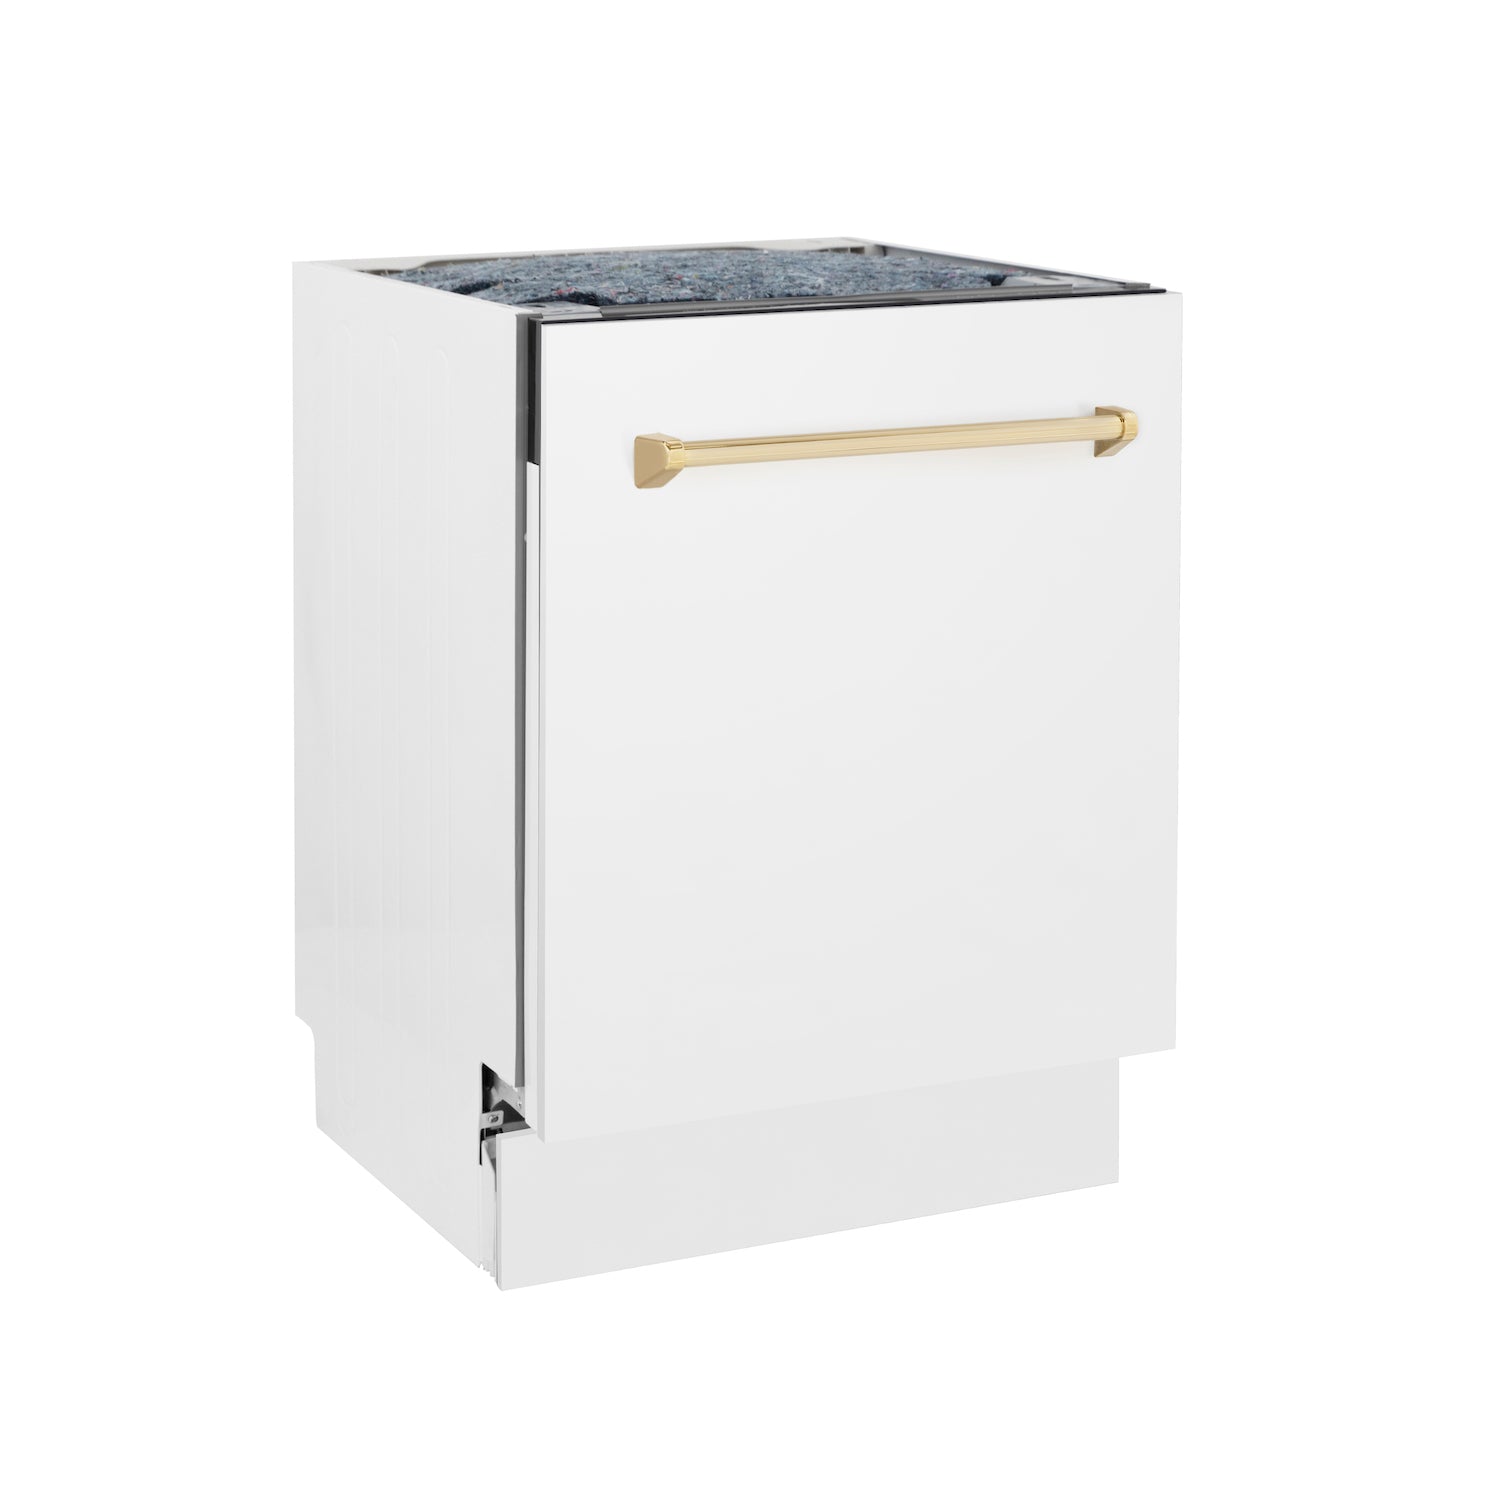 ZLINE Autograph Edition 24" Tall Tub Dishwasher in White Matte with Polished Gold Accent Handle (DWVZ-WM-24-G) side, door closed.